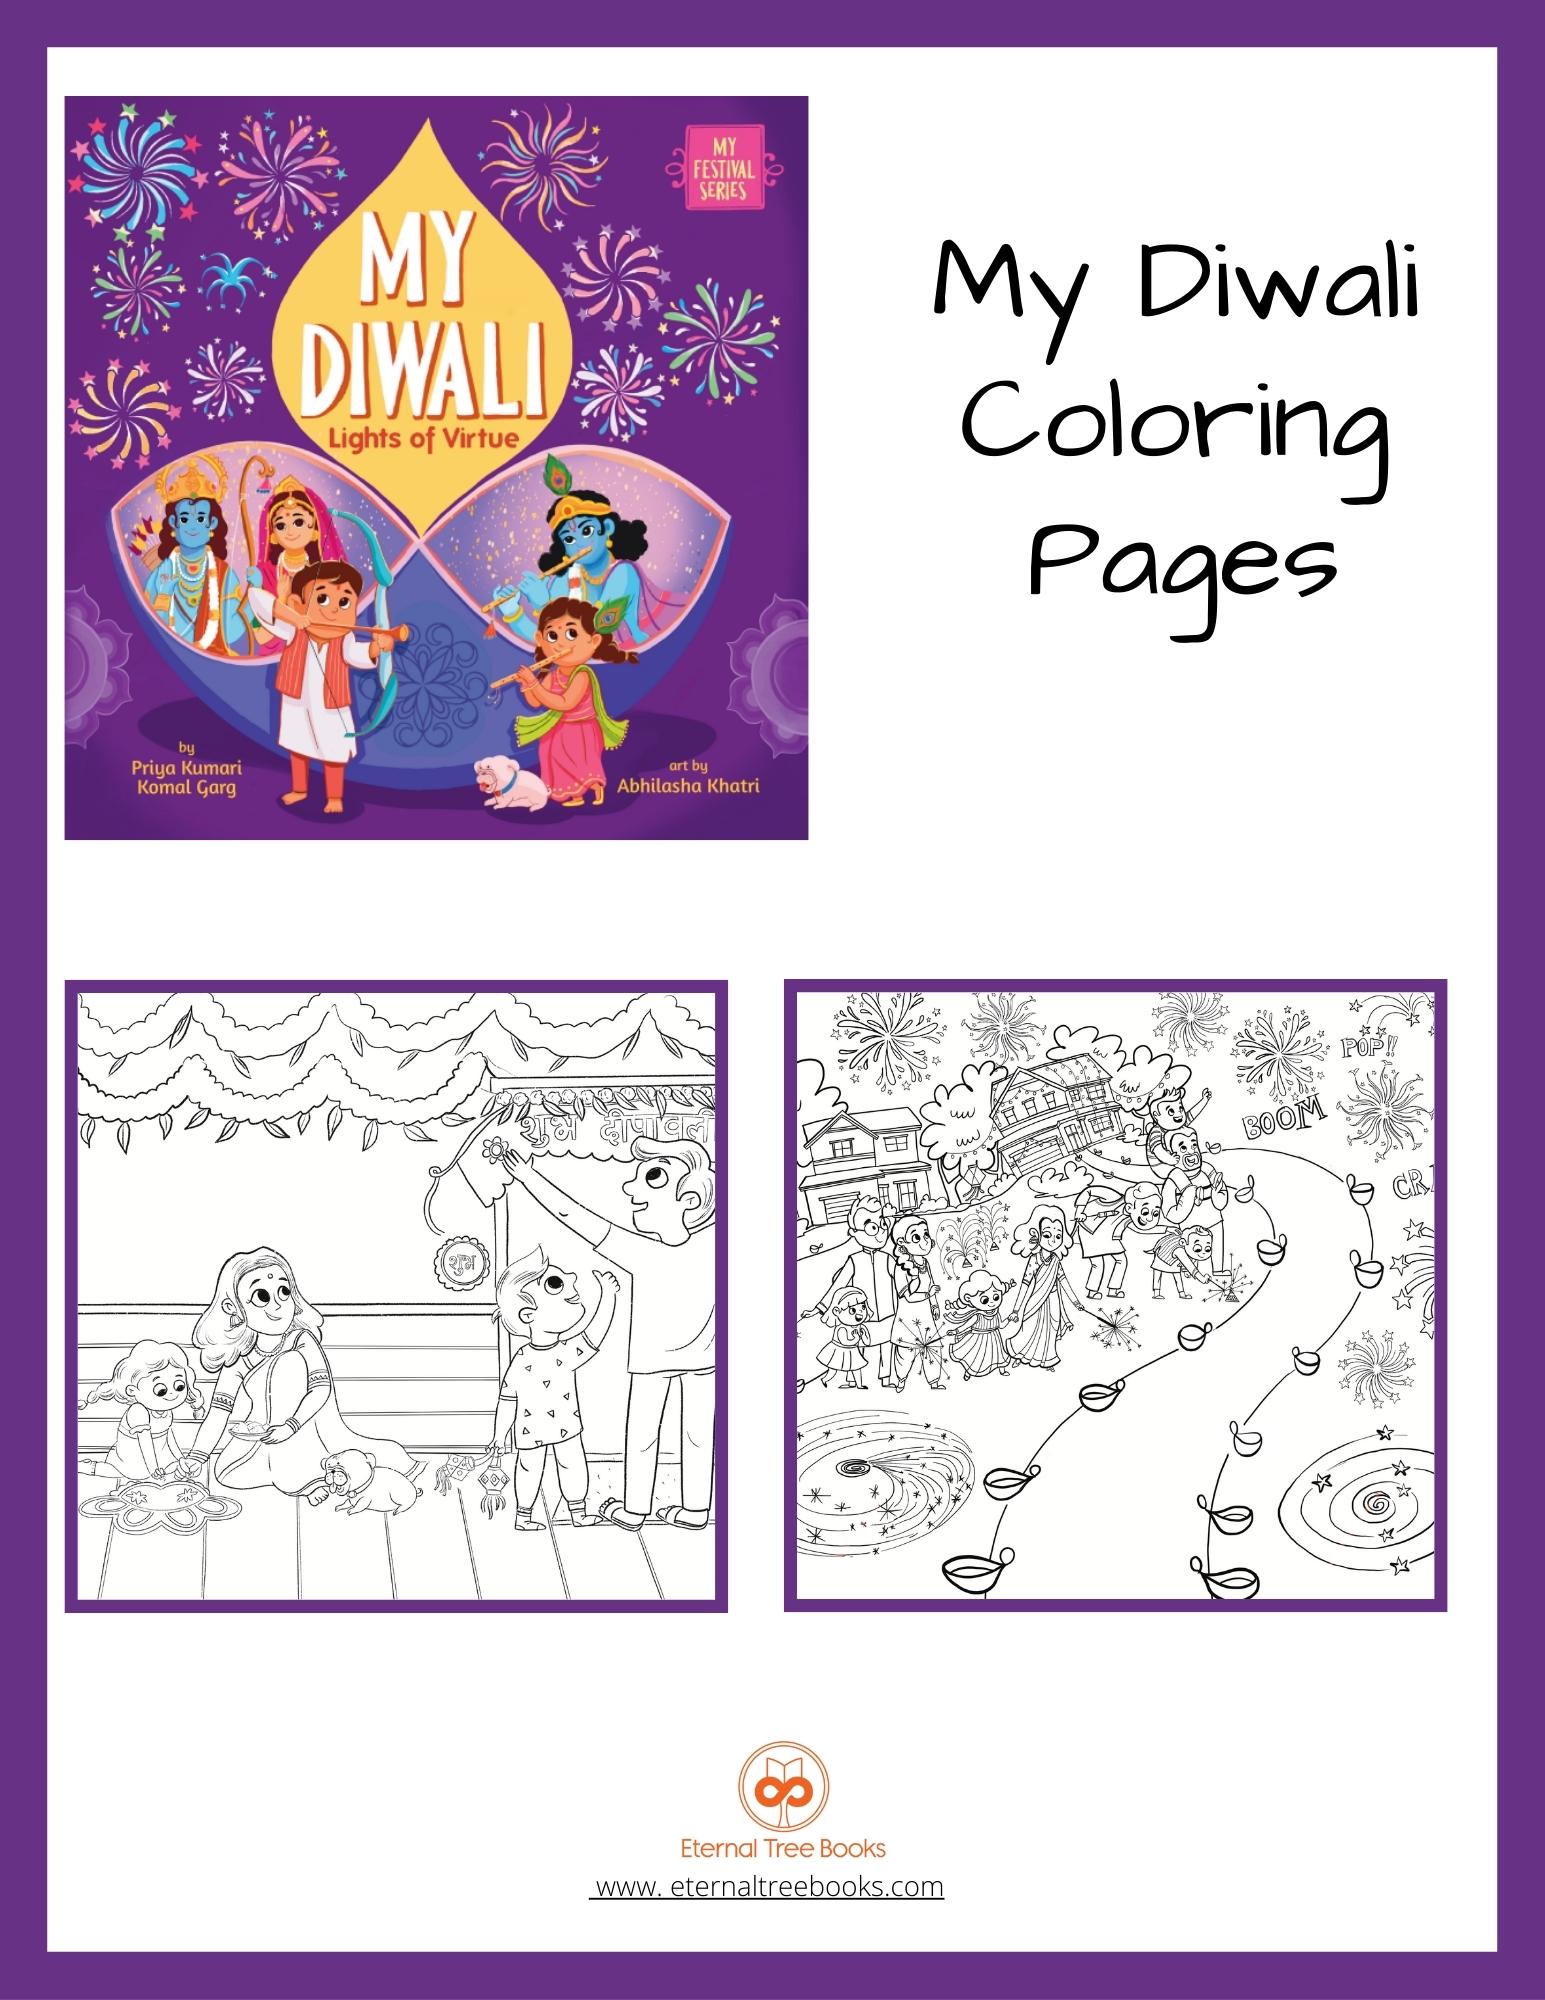 image for diwali coloring pages